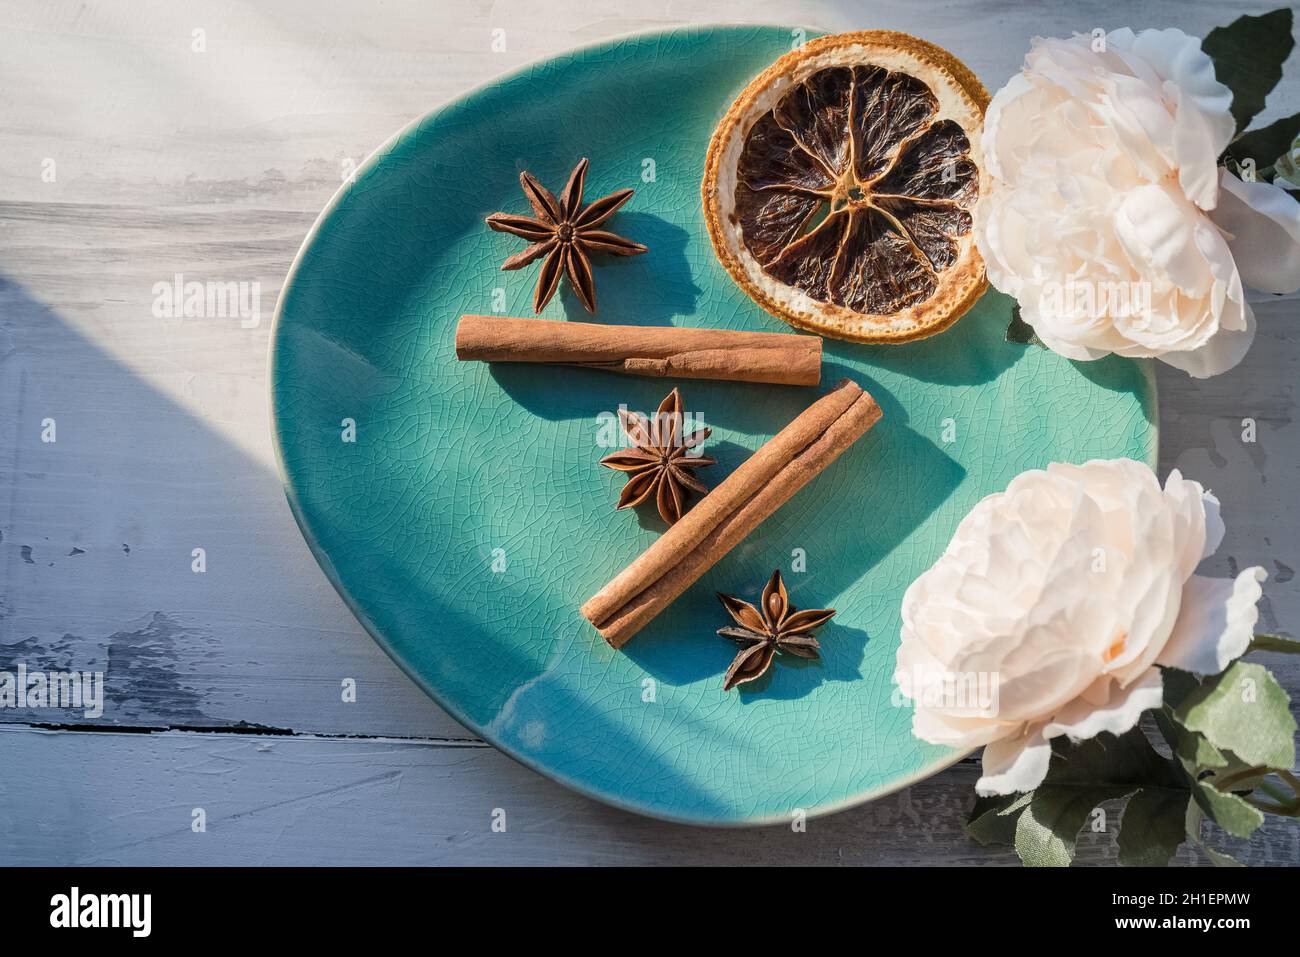 plate with several spices used for mulled wine and other cold weather drinks decorated with peony flowers Stock Photo